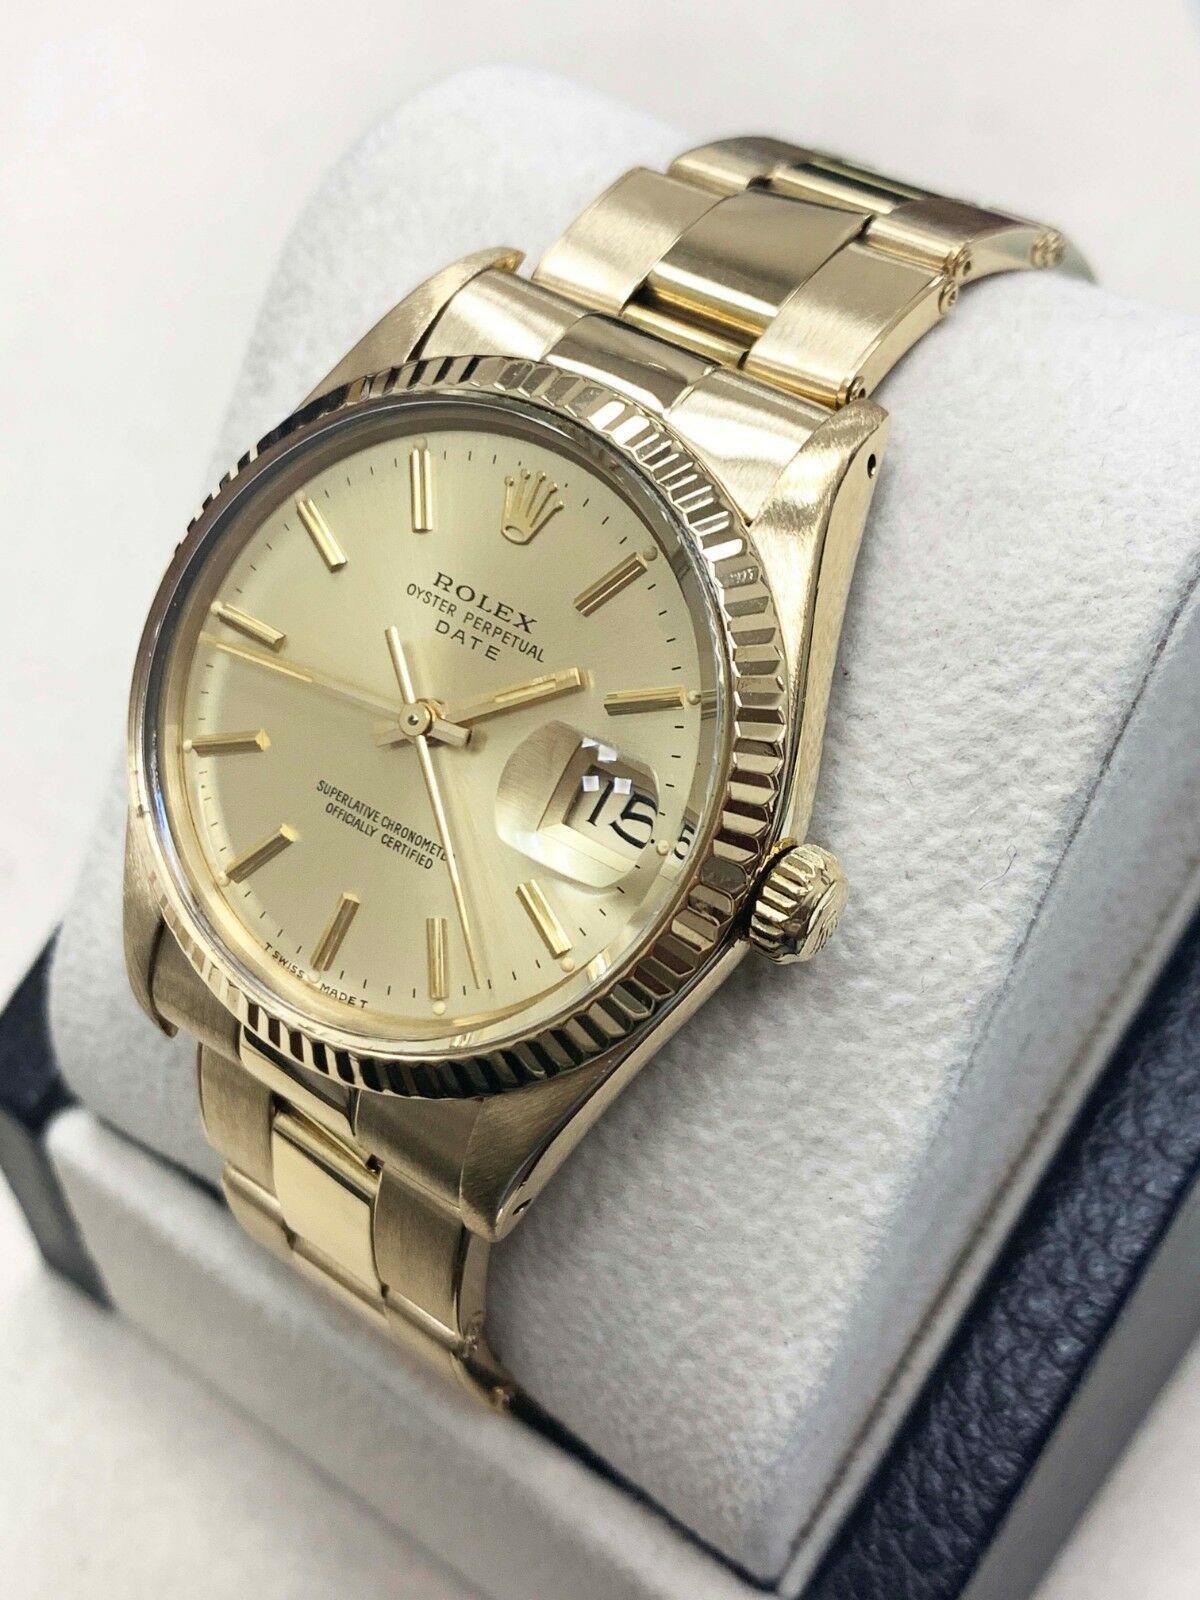 Style Number: 15038
Serial: 8329**
Model: Date
Case Material: 18K Yellow Gold 
Band: 18K Yellow Gold
Bezel: 18K Yellow Gold
Dial: Champagne 
Face: Acrylic 
Case Size: 34mm
Includes: 
-Elegant Watch Box
-Certified Appraisal 
-6 Month Warranty